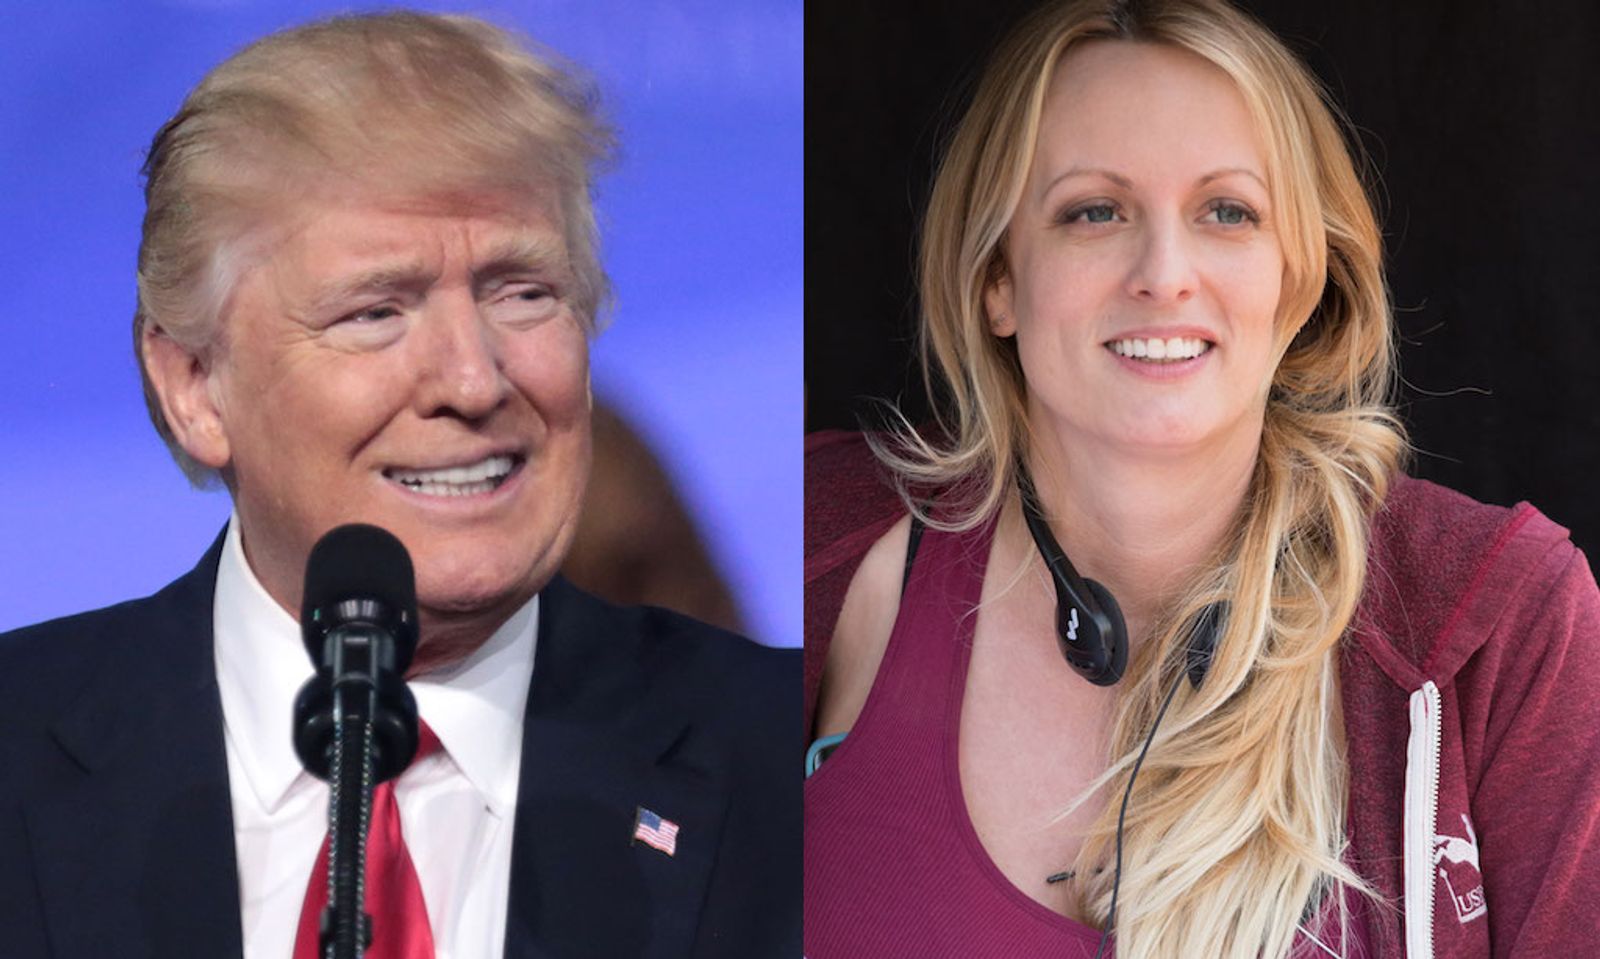 New Poll: Stormy Daniels Is More Believable Than Donald Trump